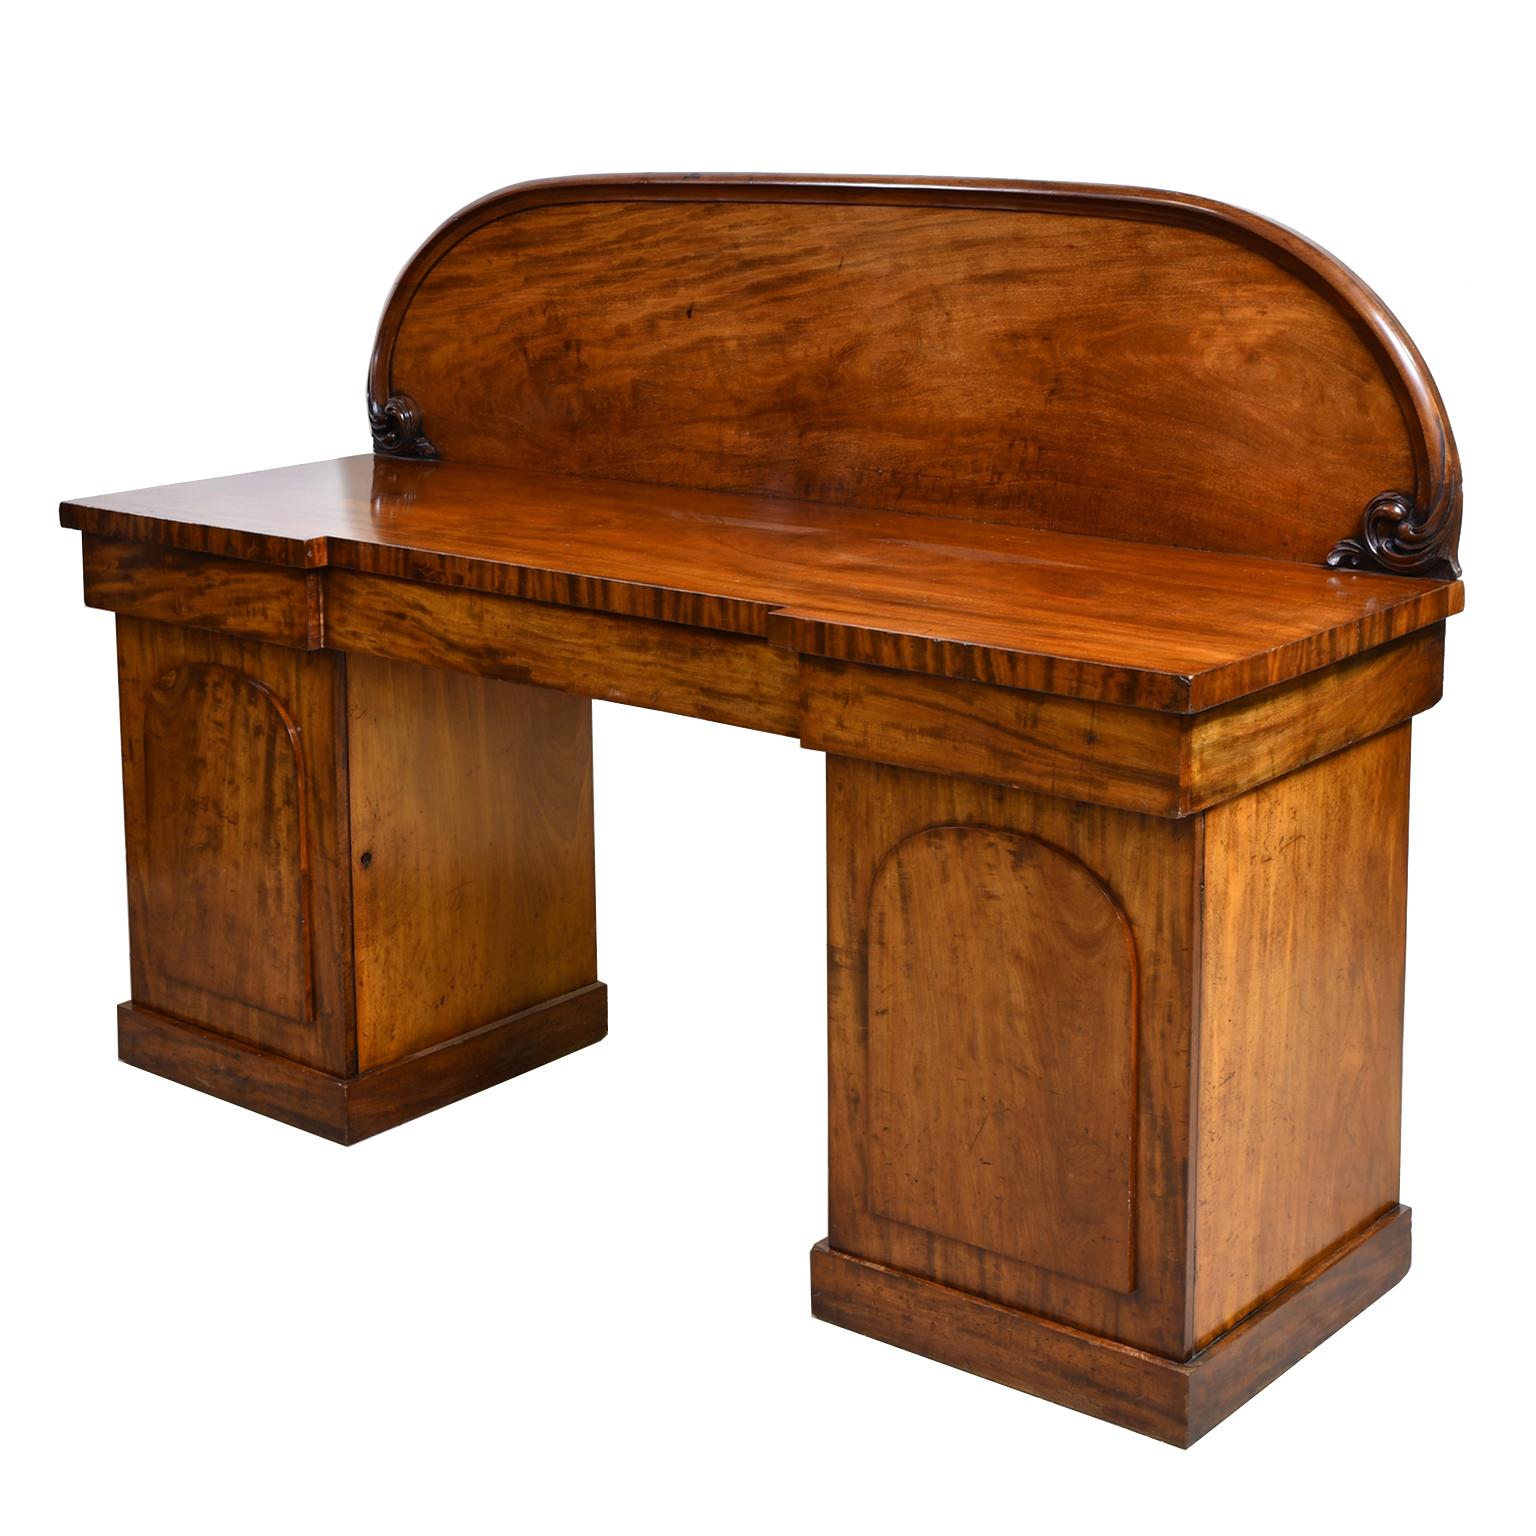 Late Victorian English Victorian Pedestal Base Sideboard in Mahogany, circa 1850 For Sale